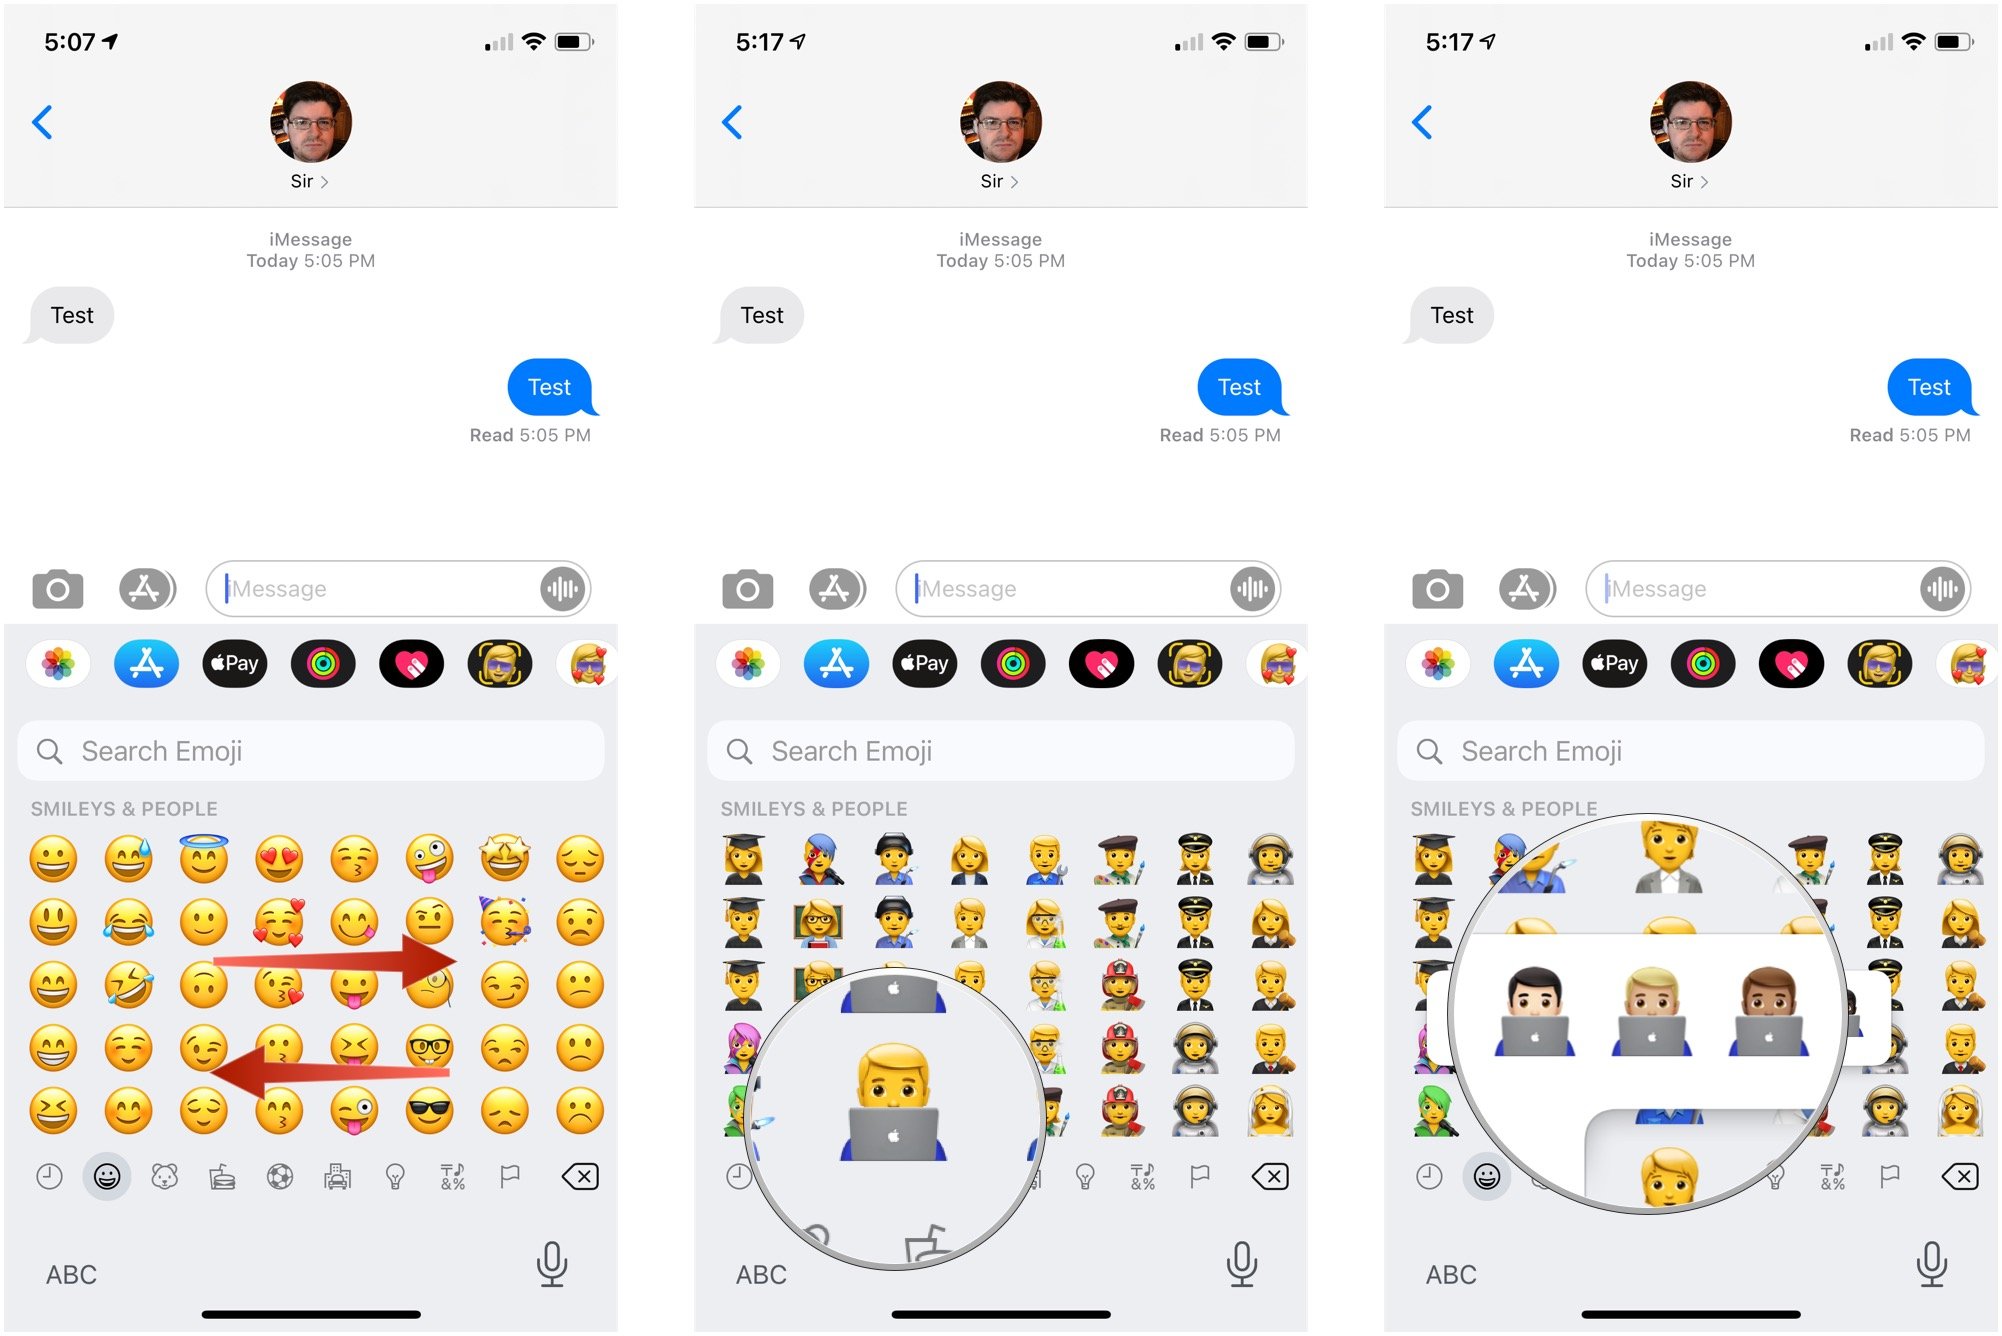 How to use emoji, showing how to swipe left or right to browse emoji, then tap the emoji you want to use, then tap the version of the emoji when it's available